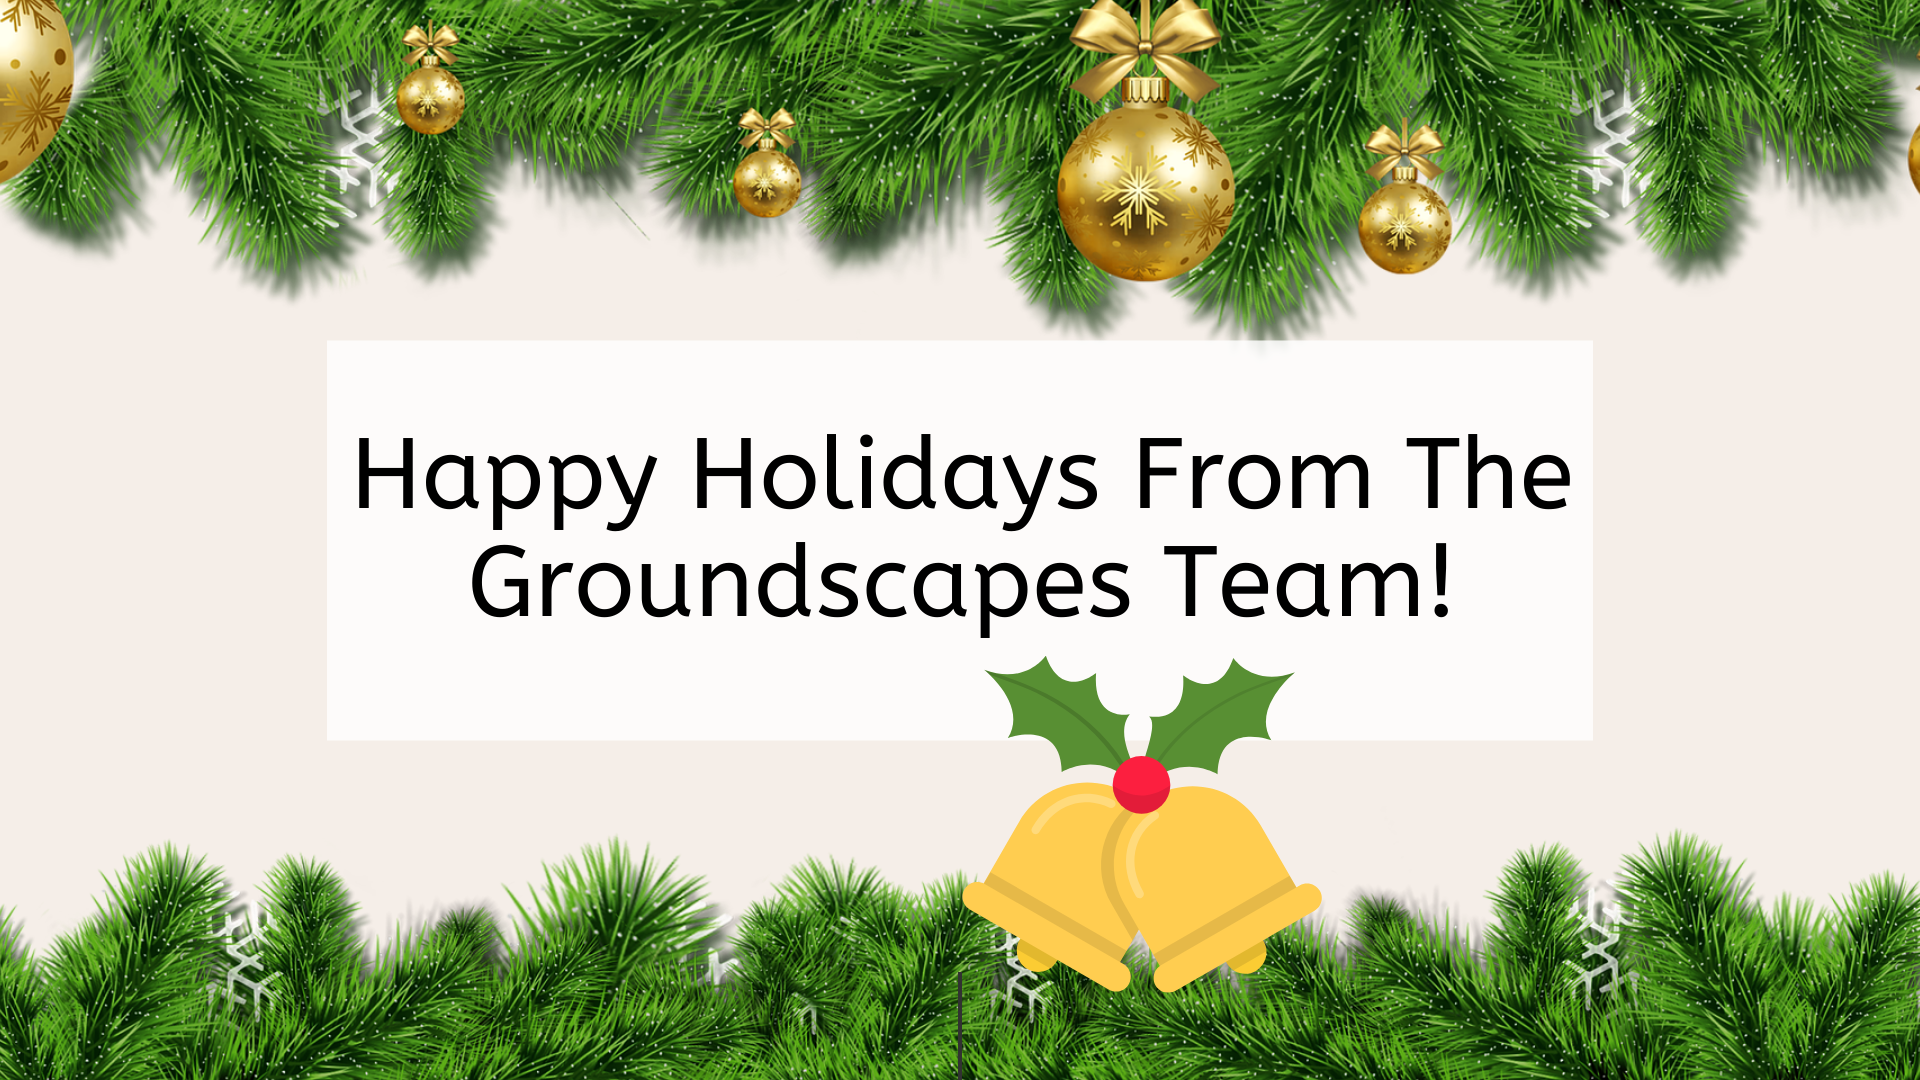 Happy Holidays From The Groundscapes Team!